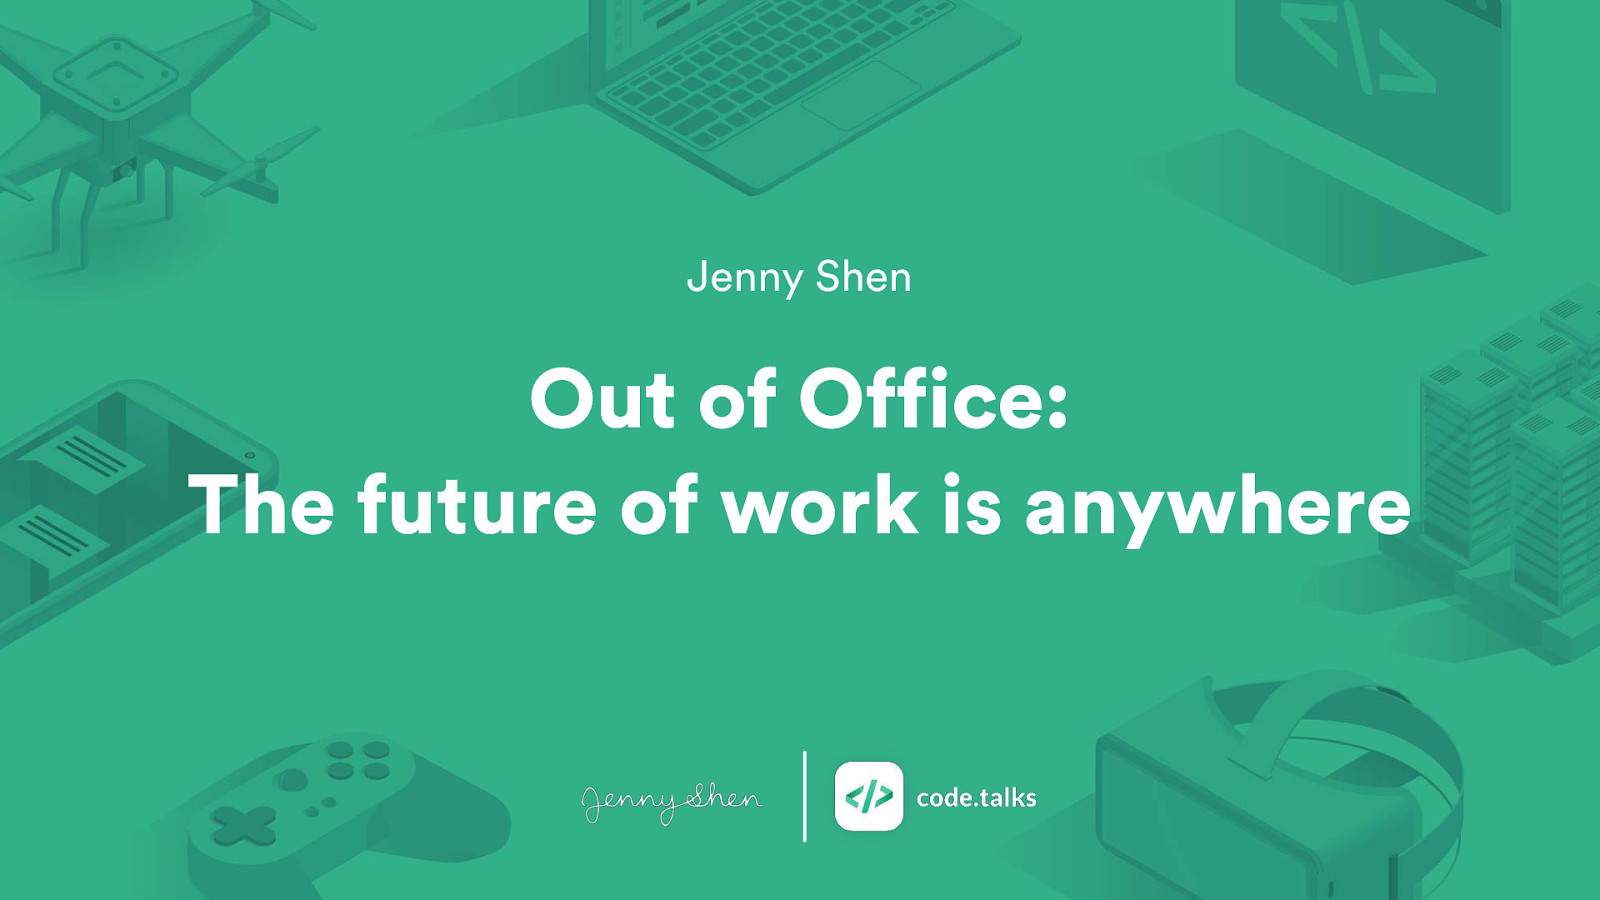 Out of Office: The future of work is anywhere